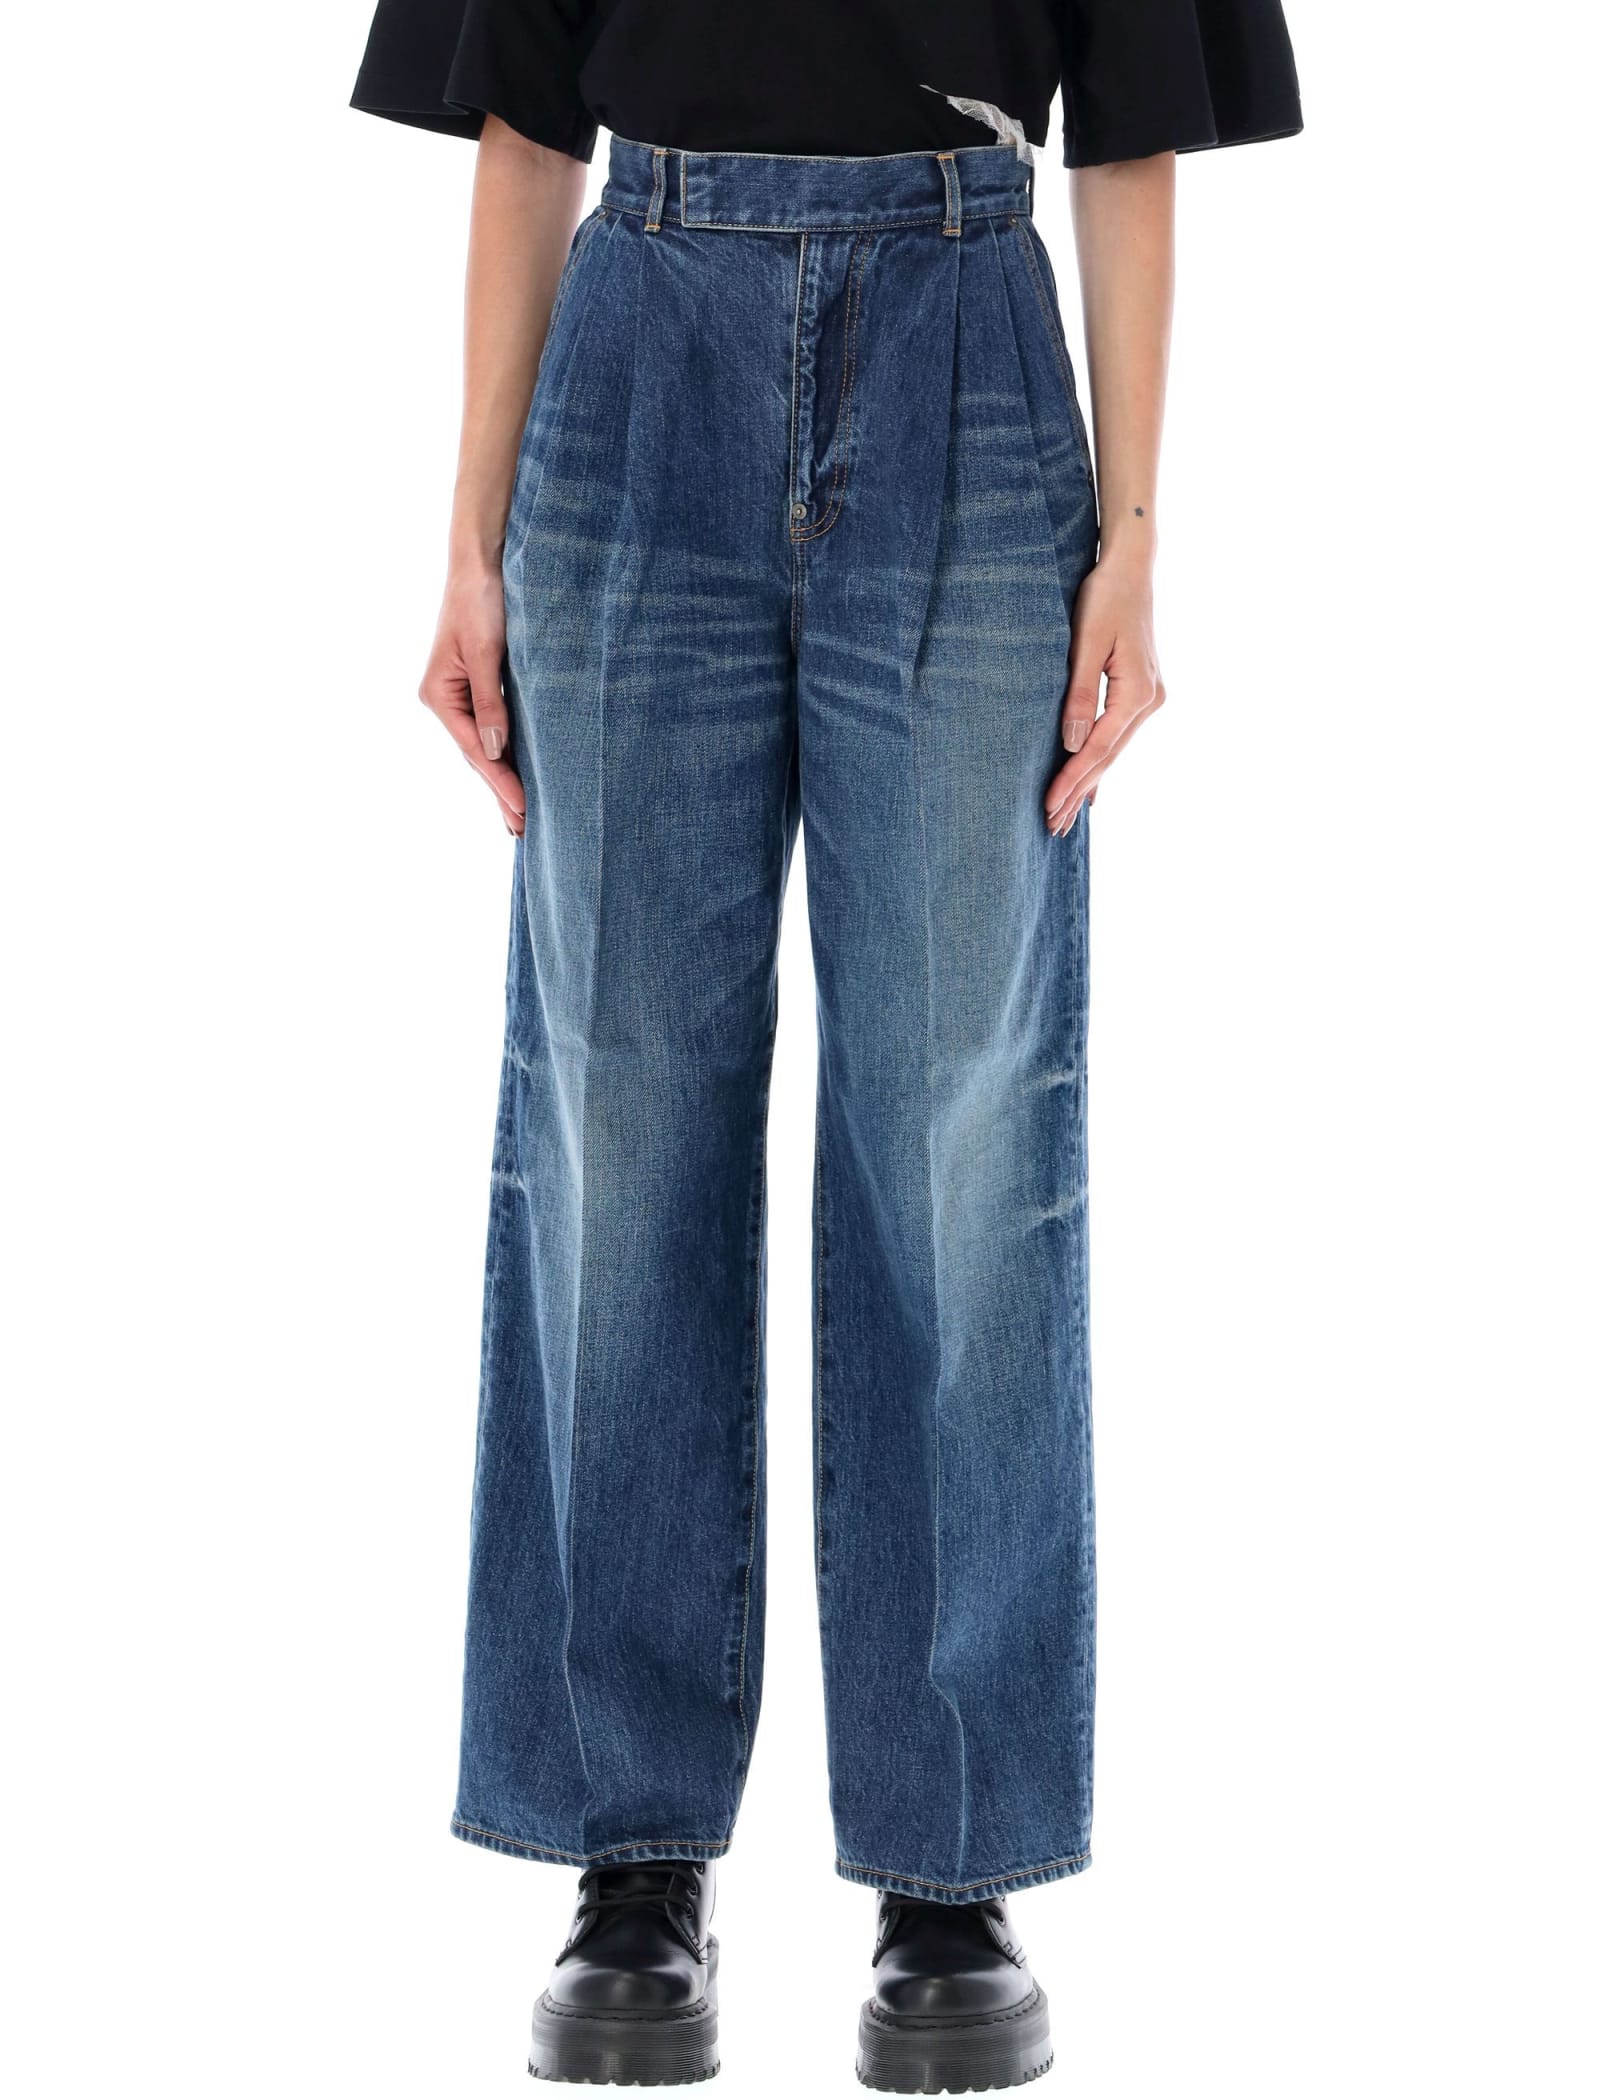 UNDERCOVER PLEATED DENIM JEANS